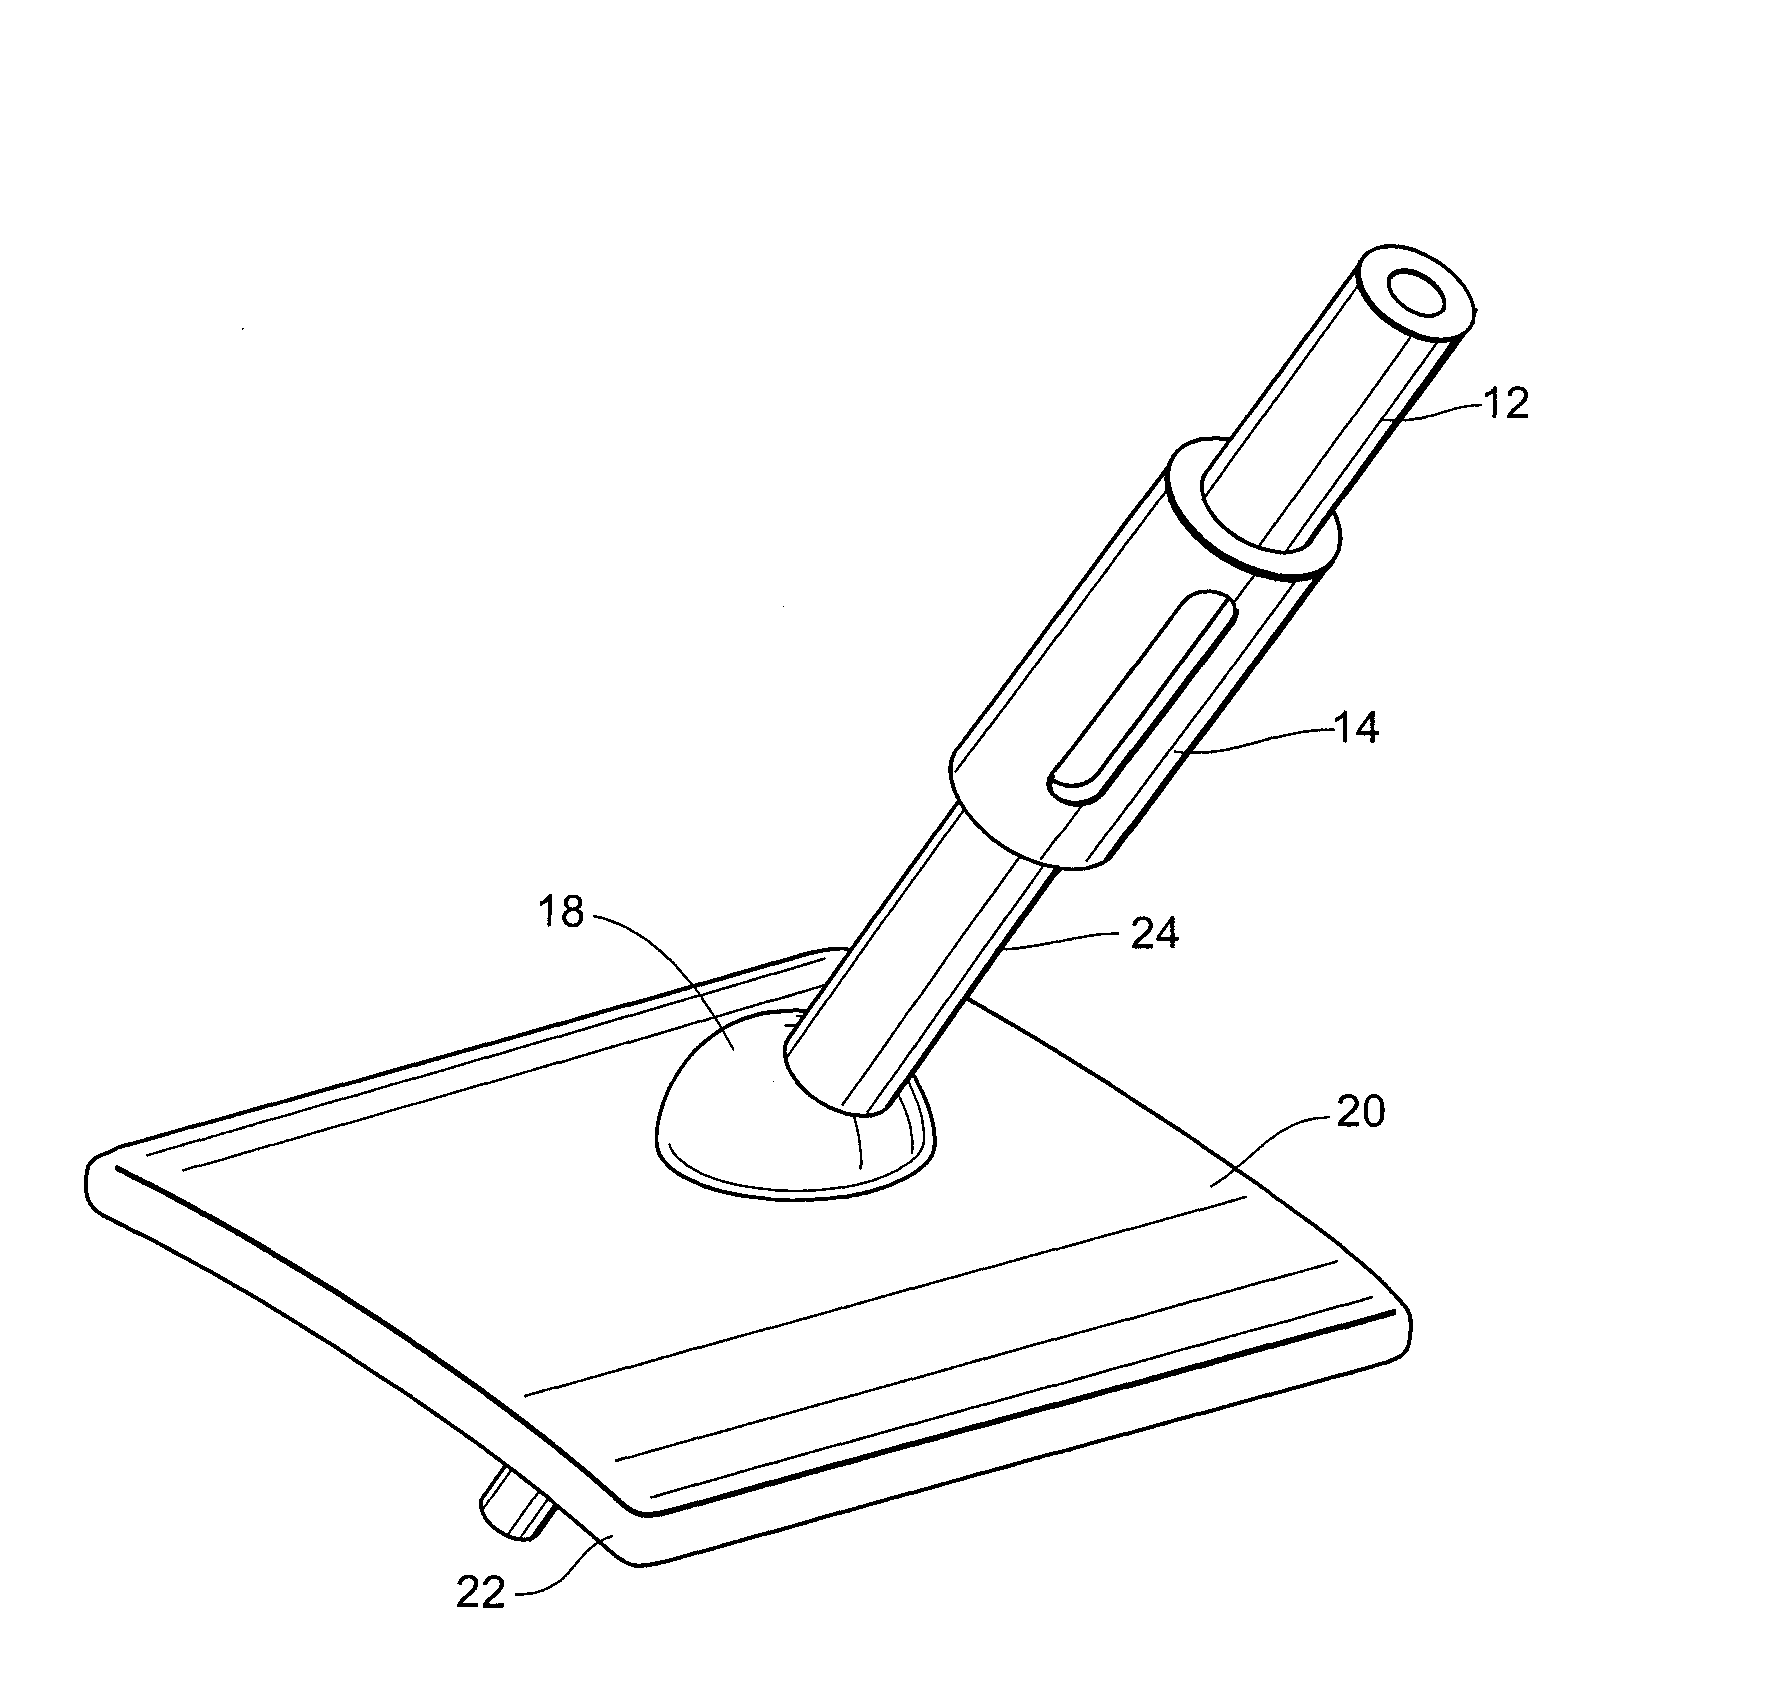 Anchorless Non-Invasive Force Dissipation System for Orthopedic Instrumentation